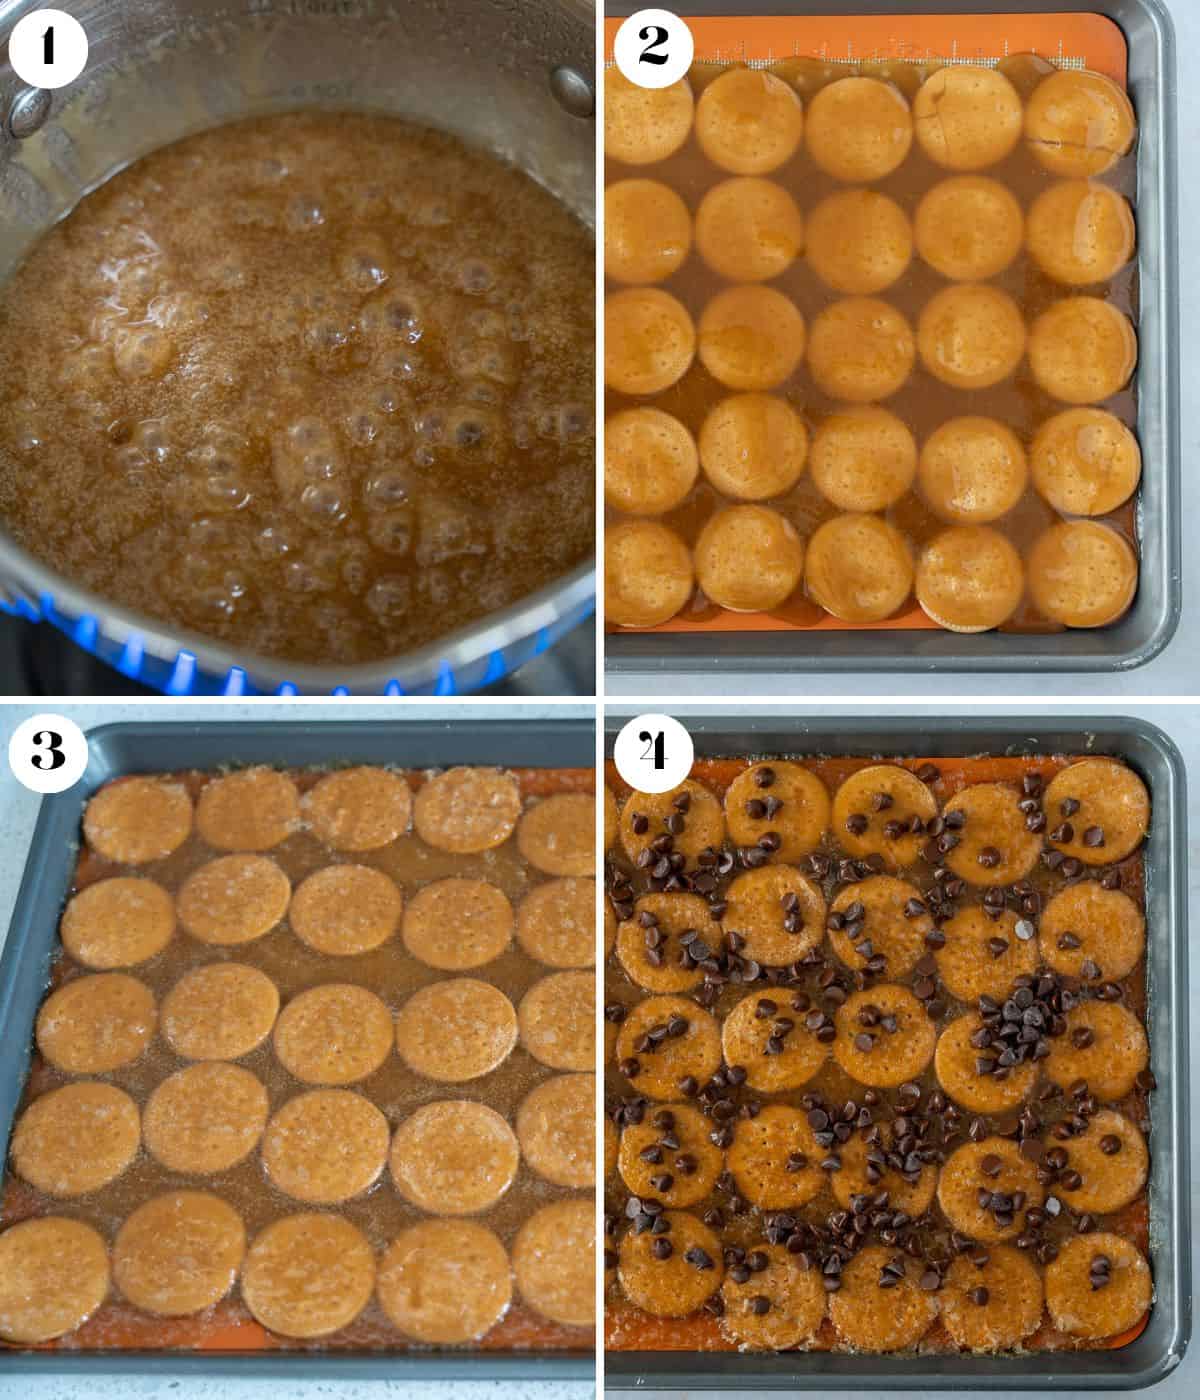 Four image collage showing, melted toffee, toffee over cookies, and chocolate chops on top of cookies.